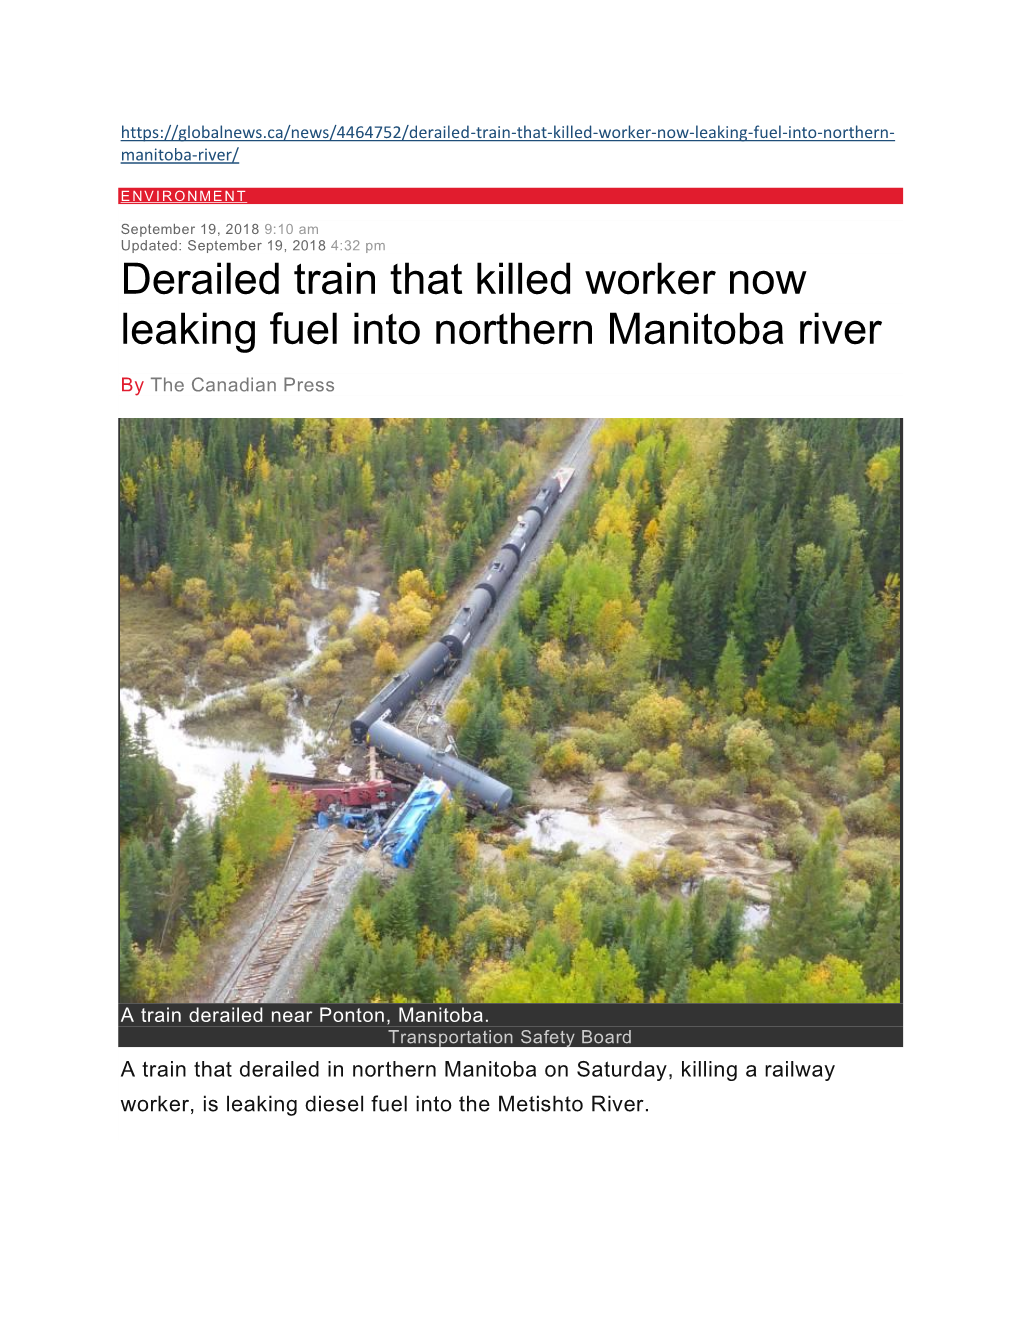 Derailed Train That Killed Worker Now Leaking Fuel Into Northern Manitoba River